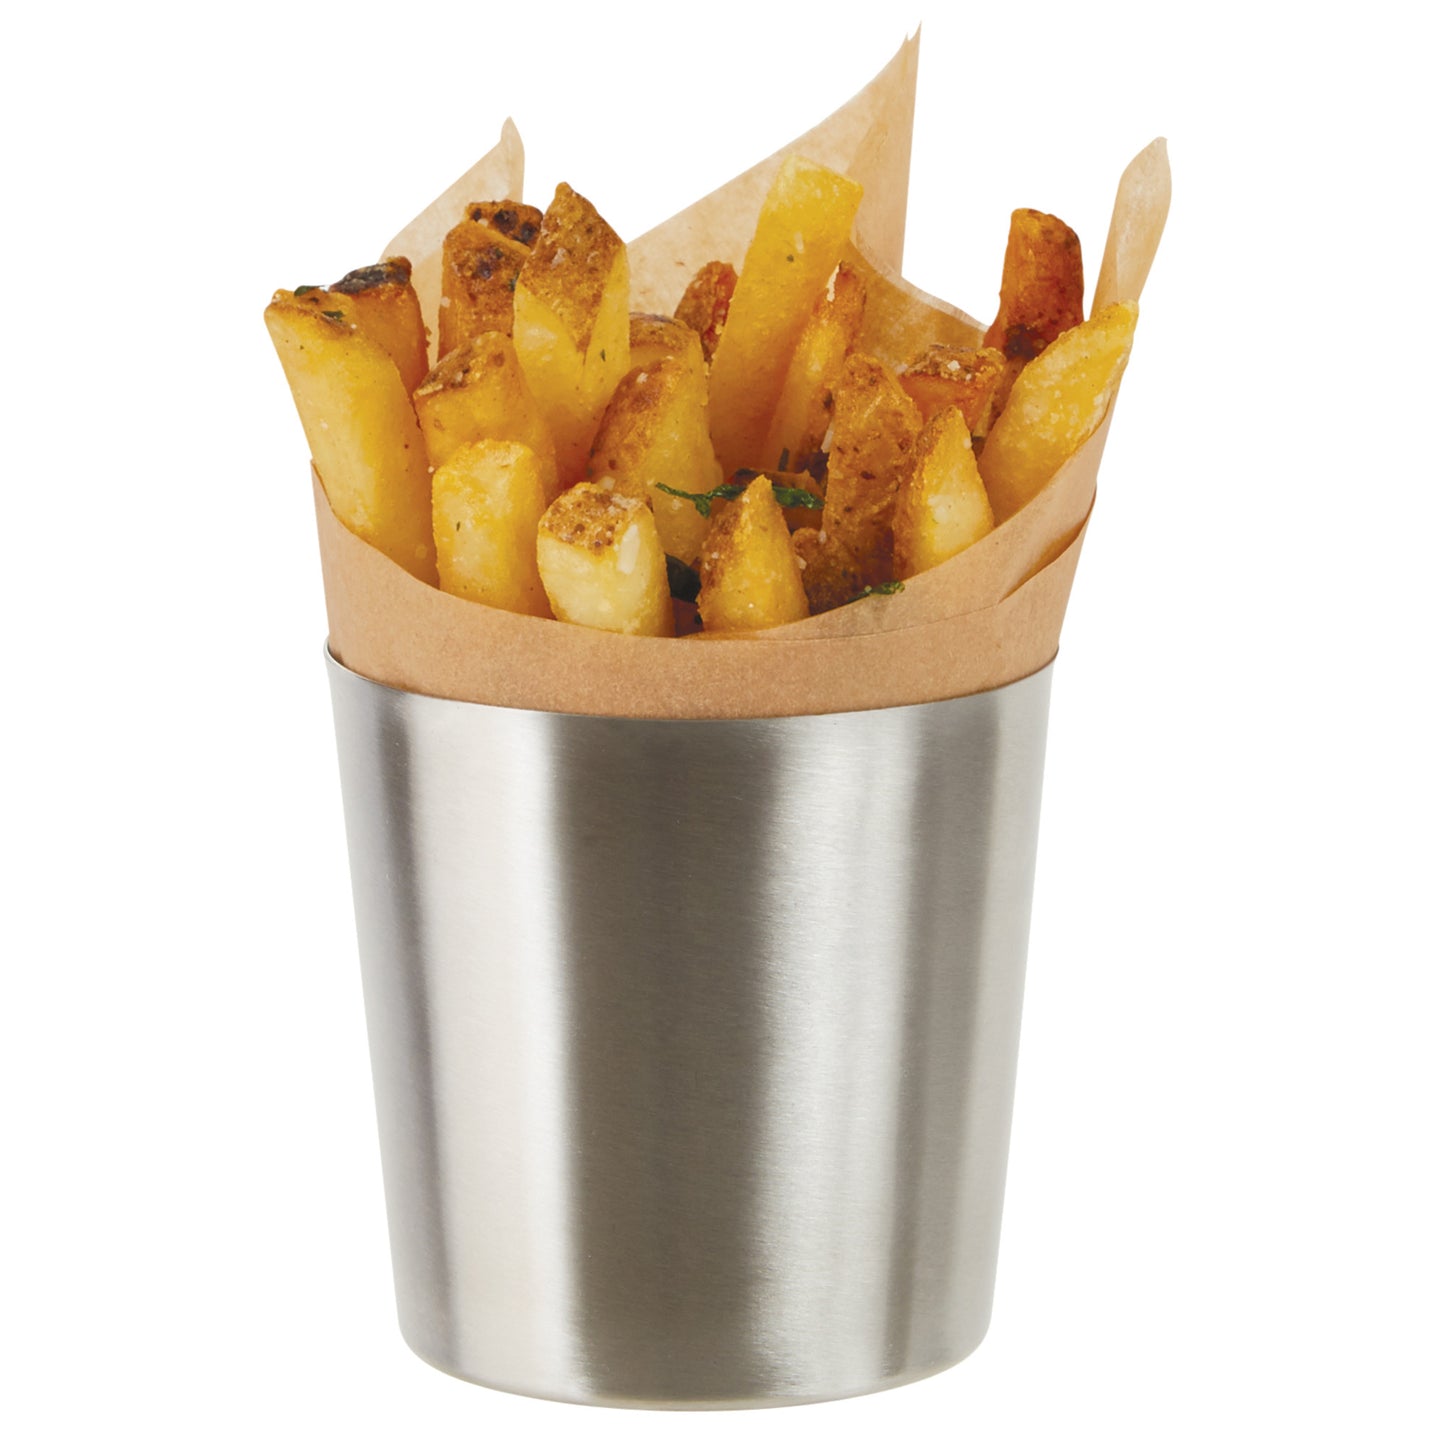 SFC-35 - Stainless Steel Fry Cup - Smooth